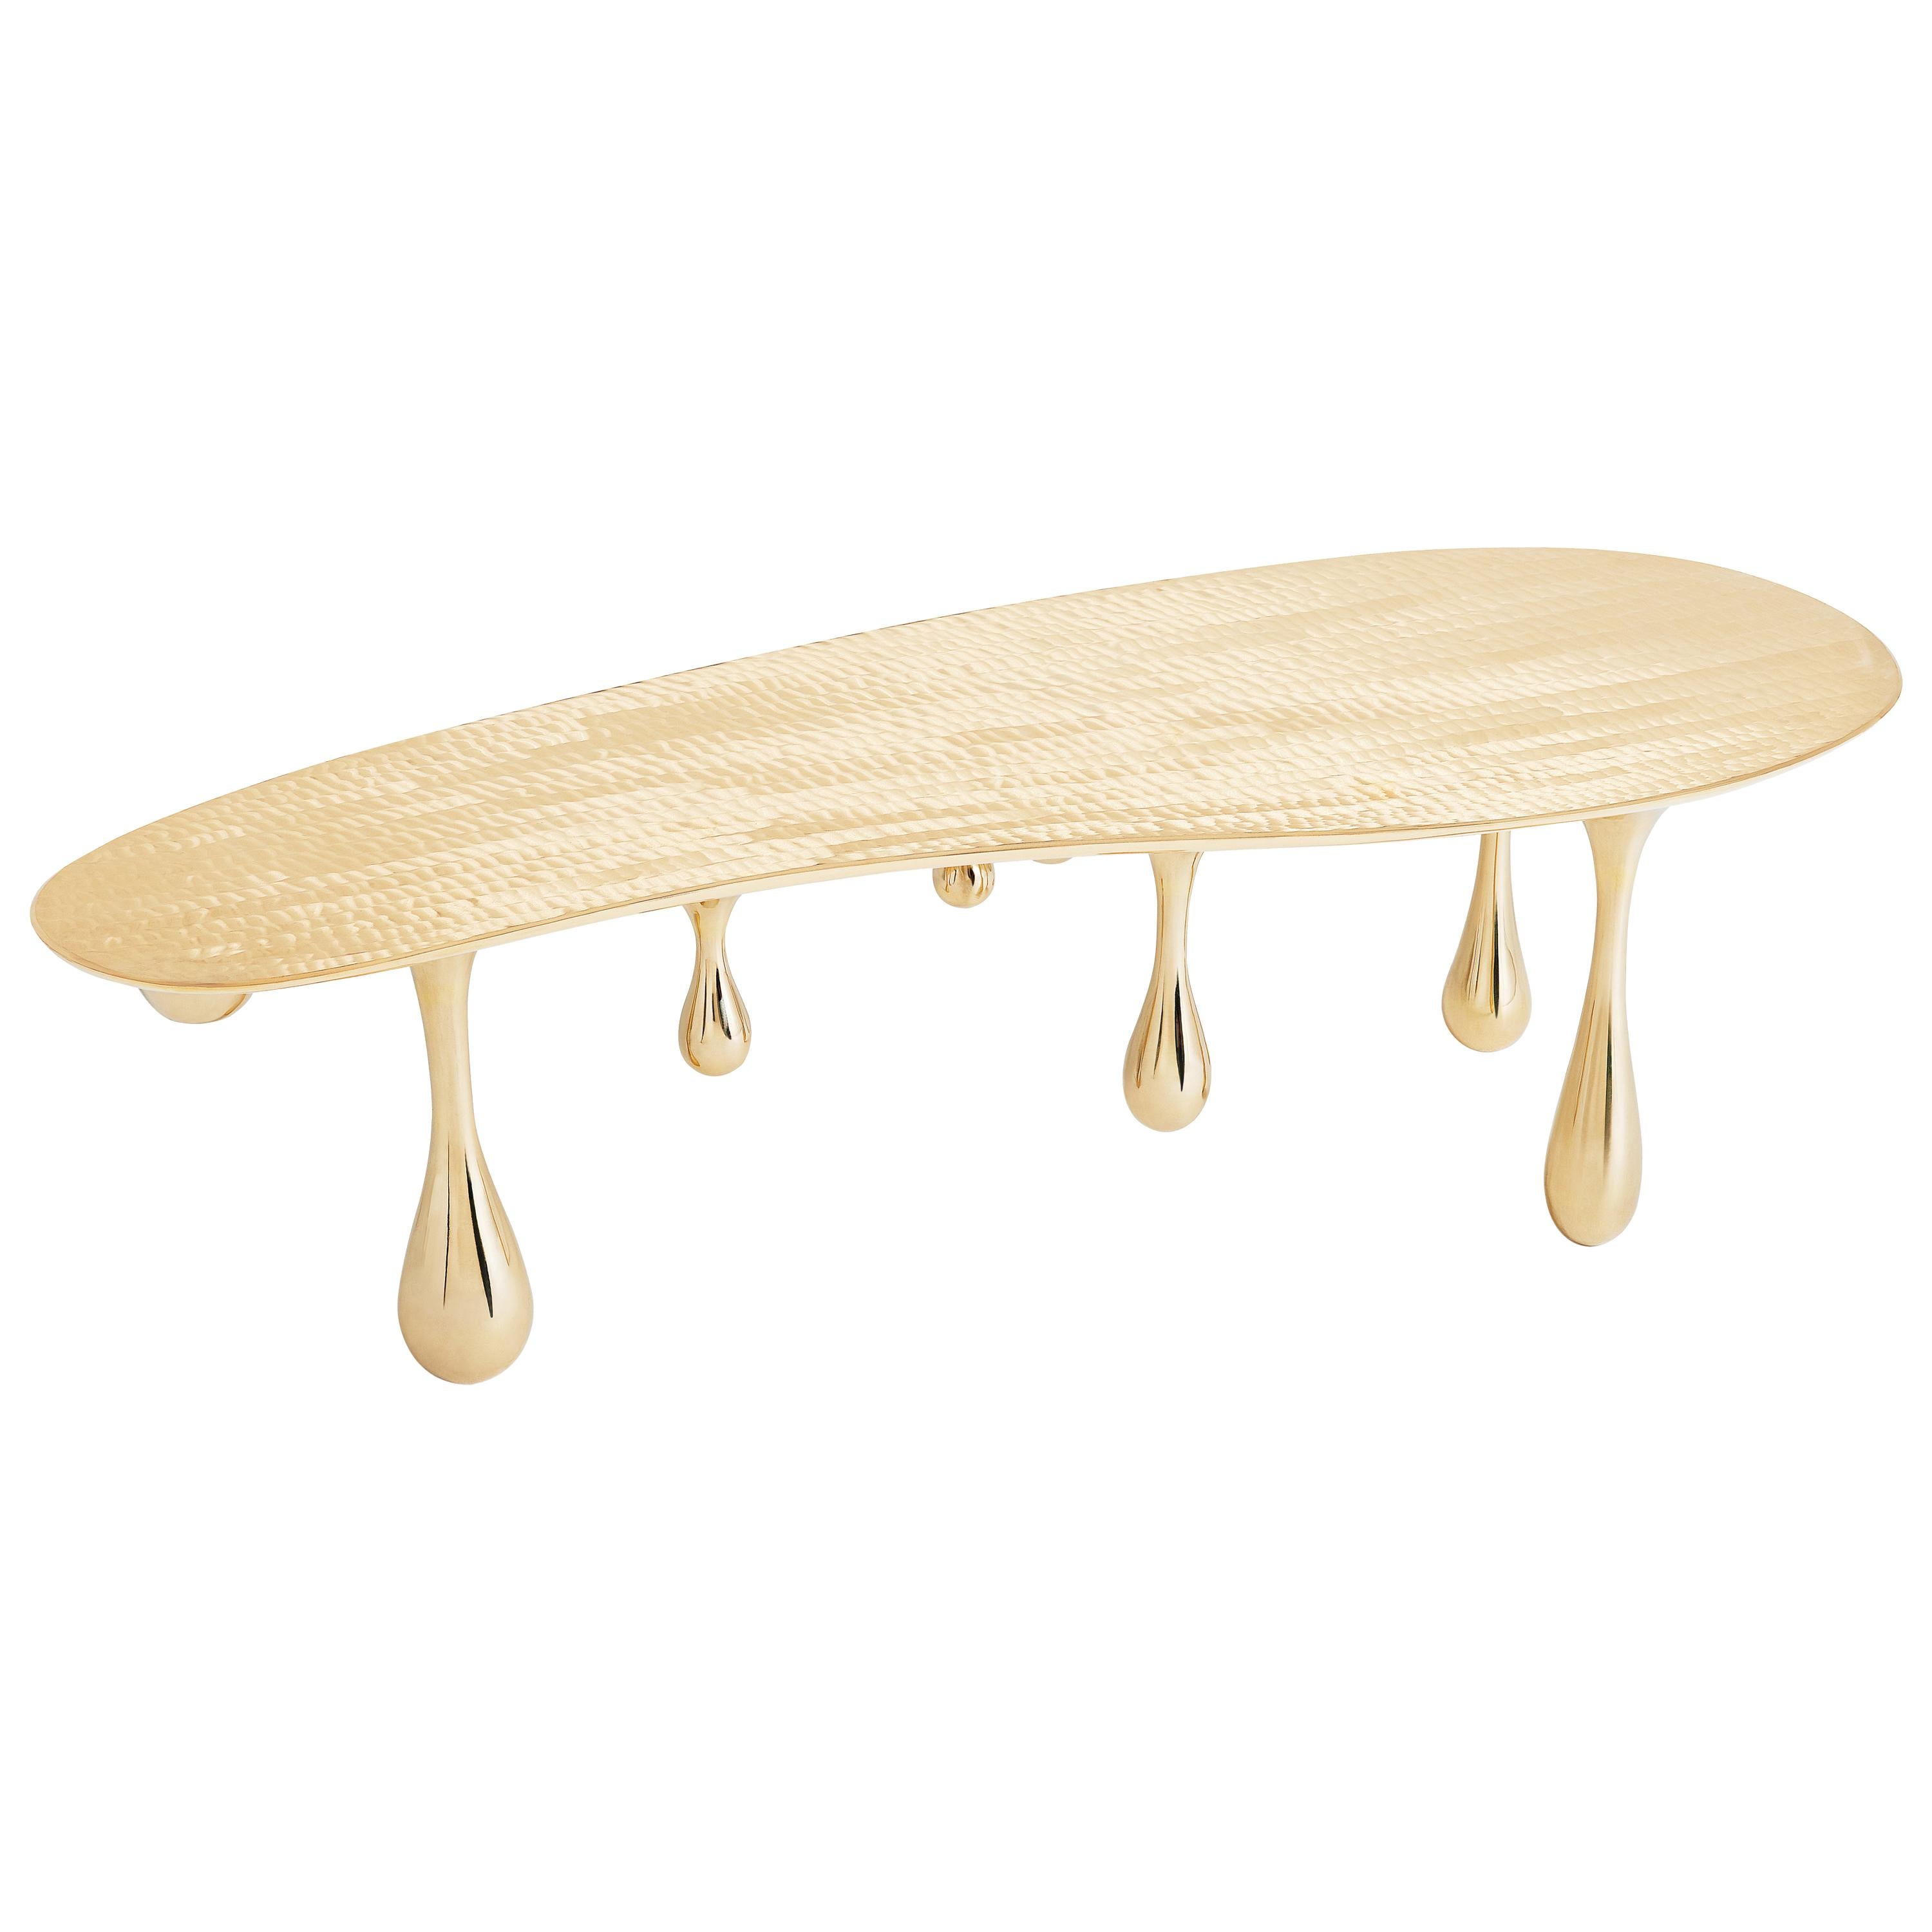 Melting Coffee Table/Cocktail Table 'Bean Shape' Polished Brass by Zhipeng Tan